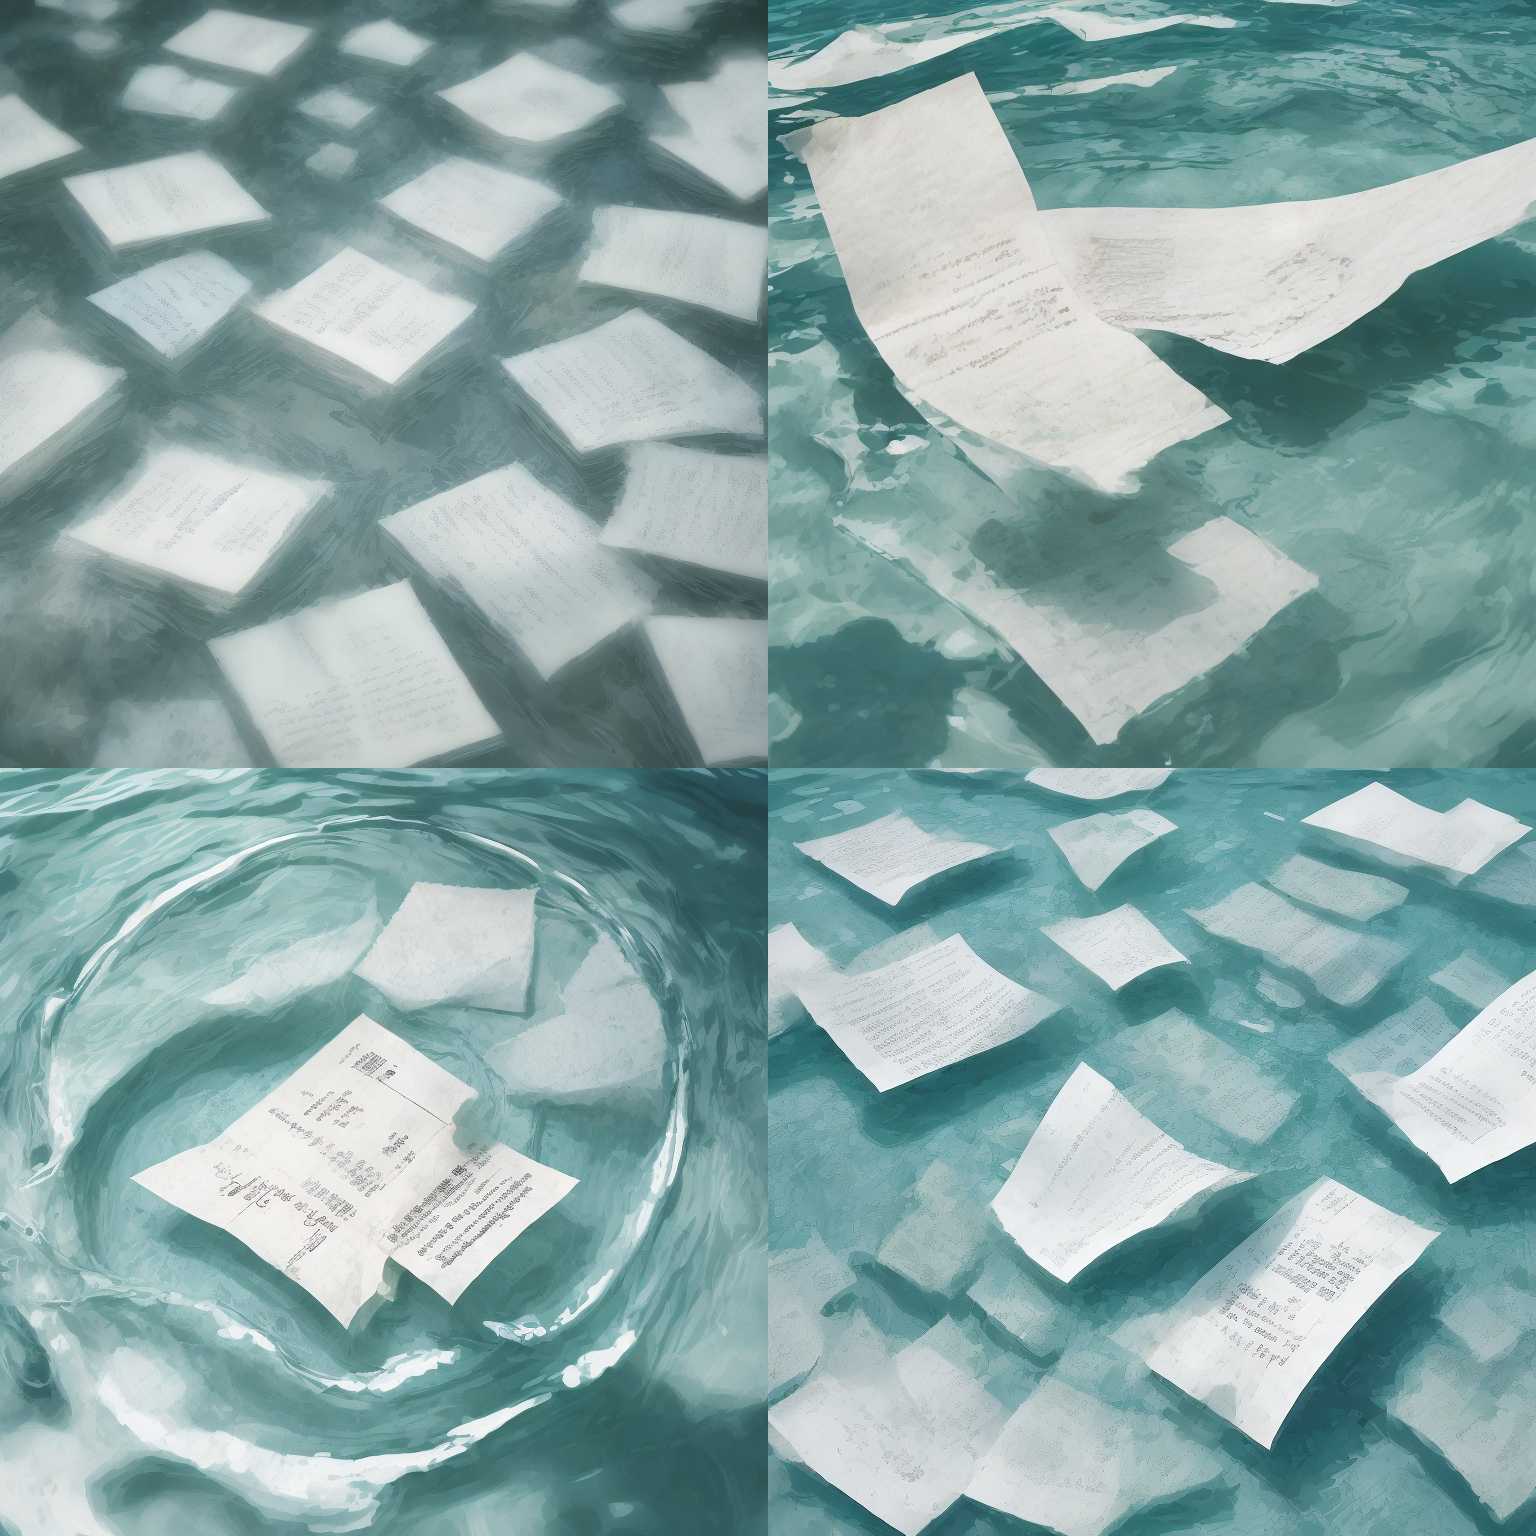 A piece of paper in water